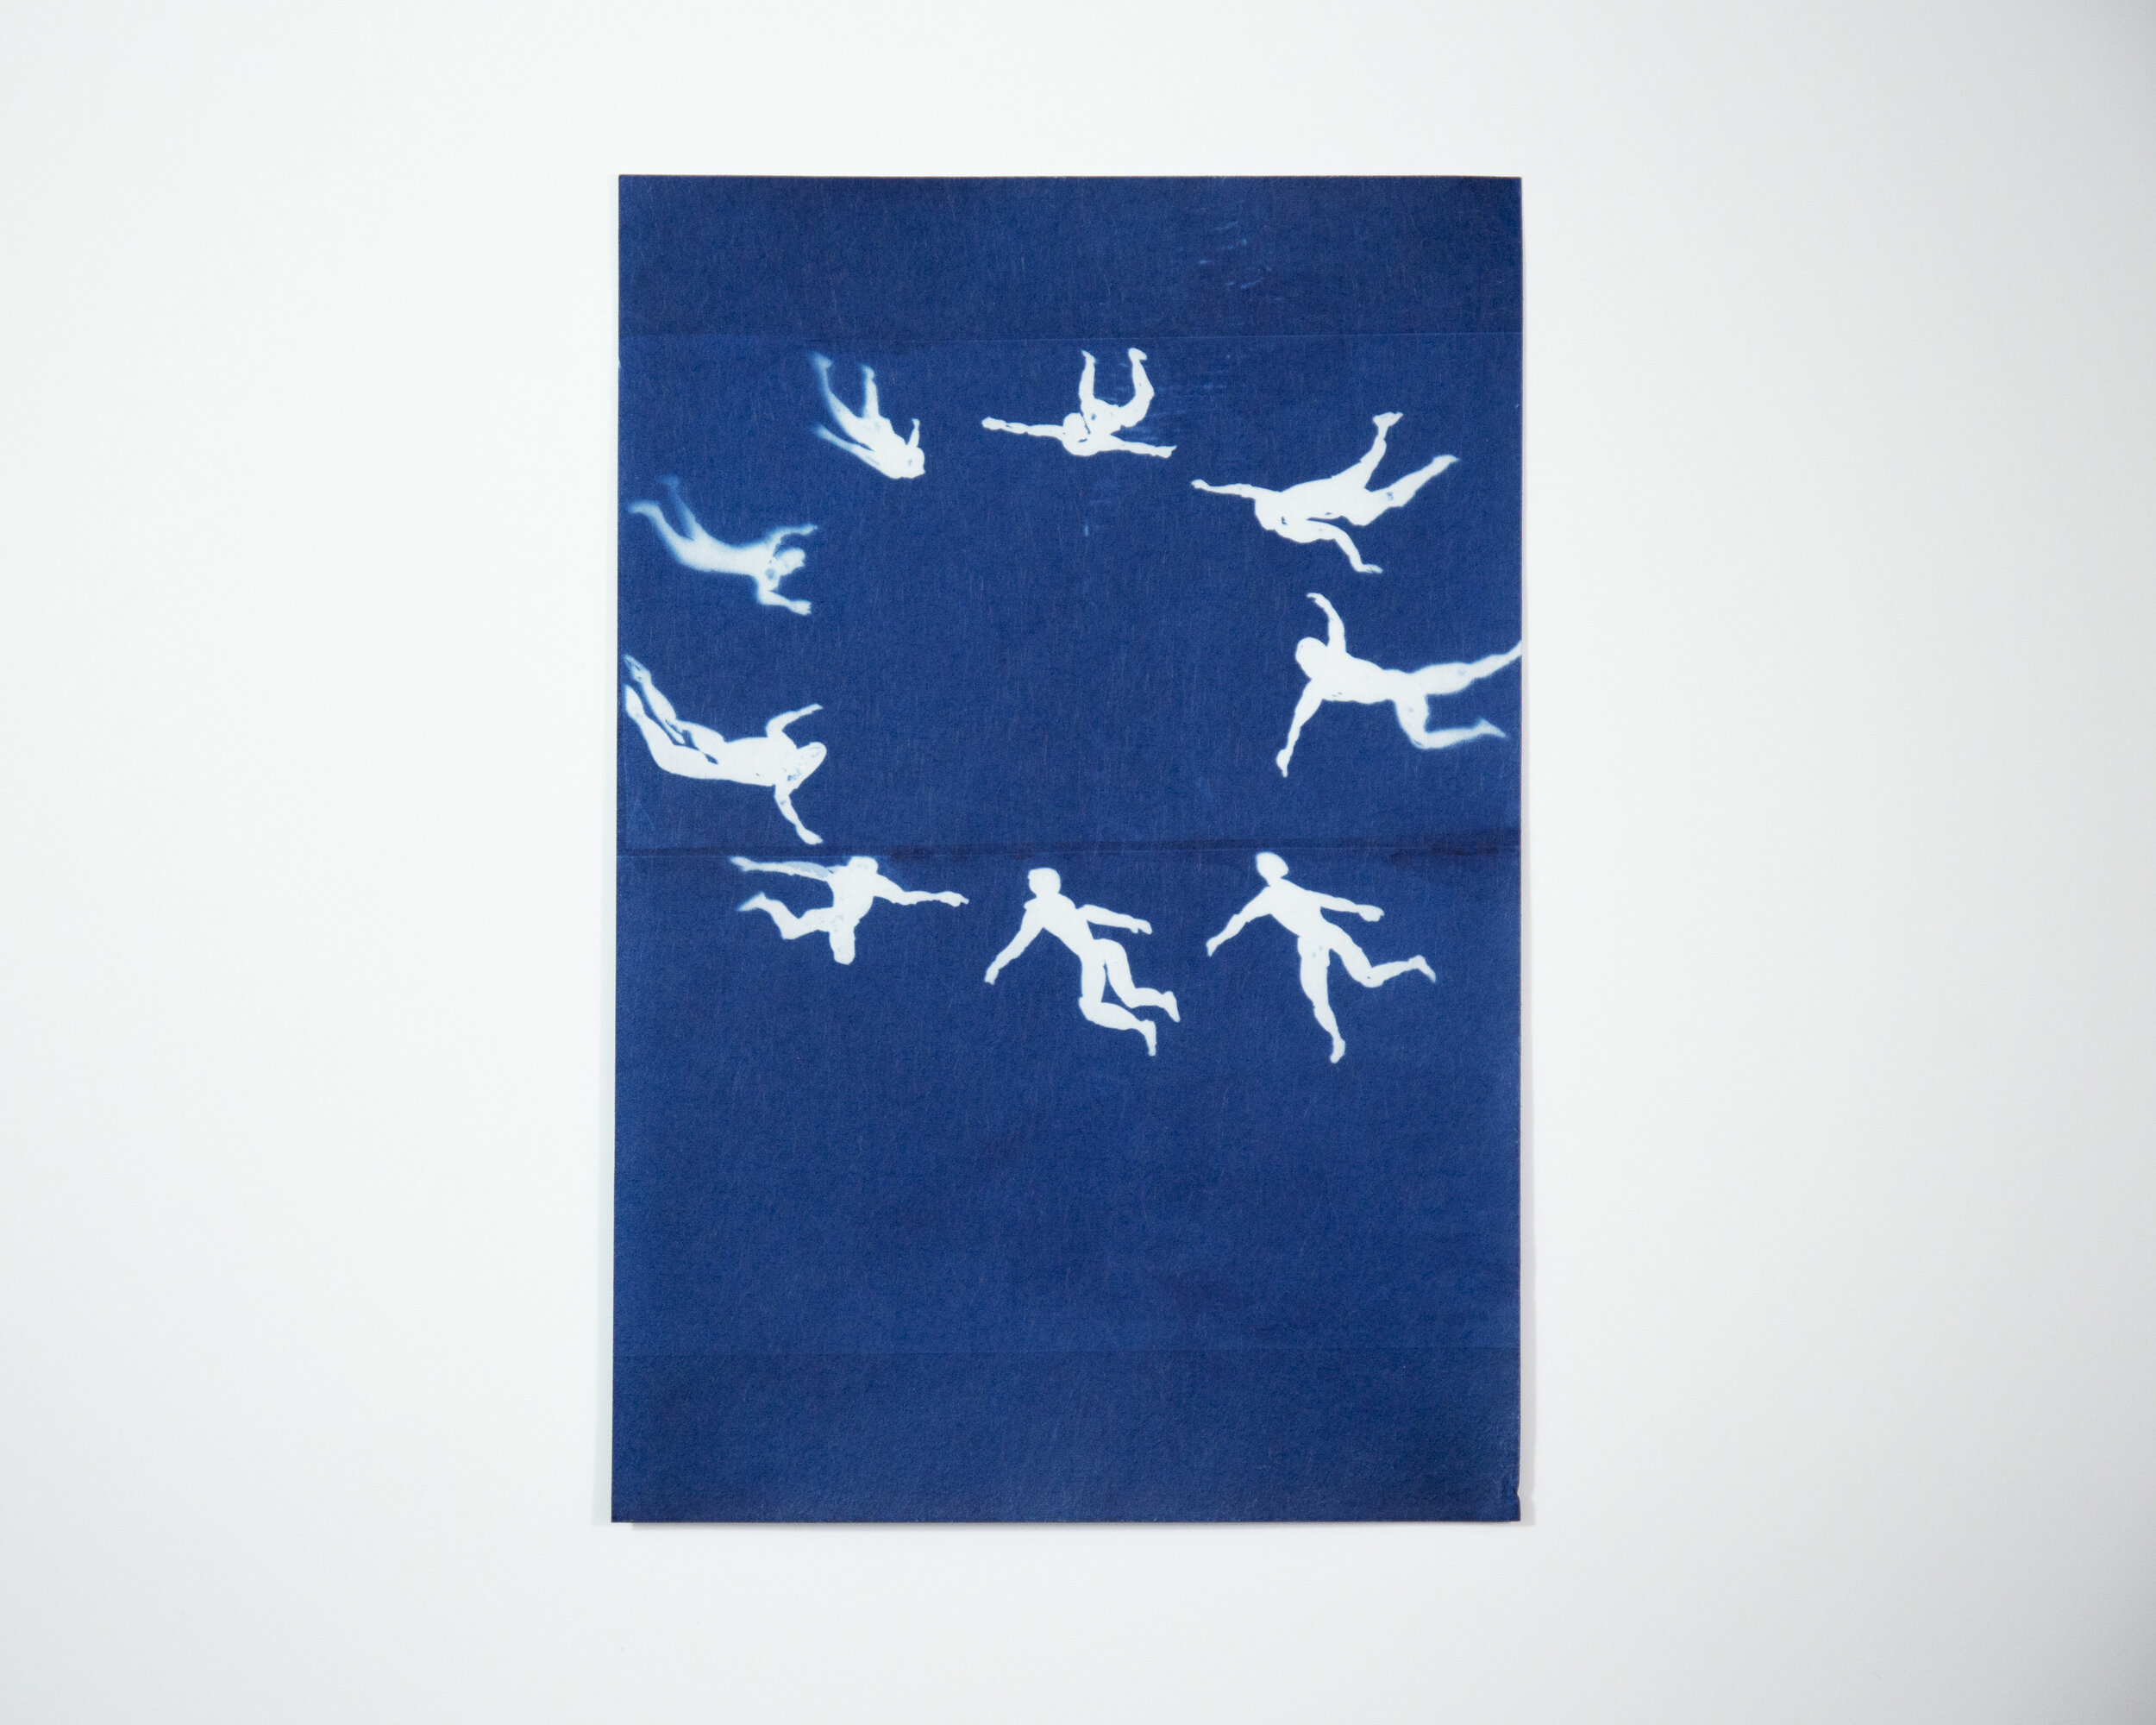  Han Qin,  United 2 , 2018, Cyanotype on paper, 10 x 6 ½ inches (25.4 x 16.8 cm) ©Han Qin, courtesy Fou Gallery 